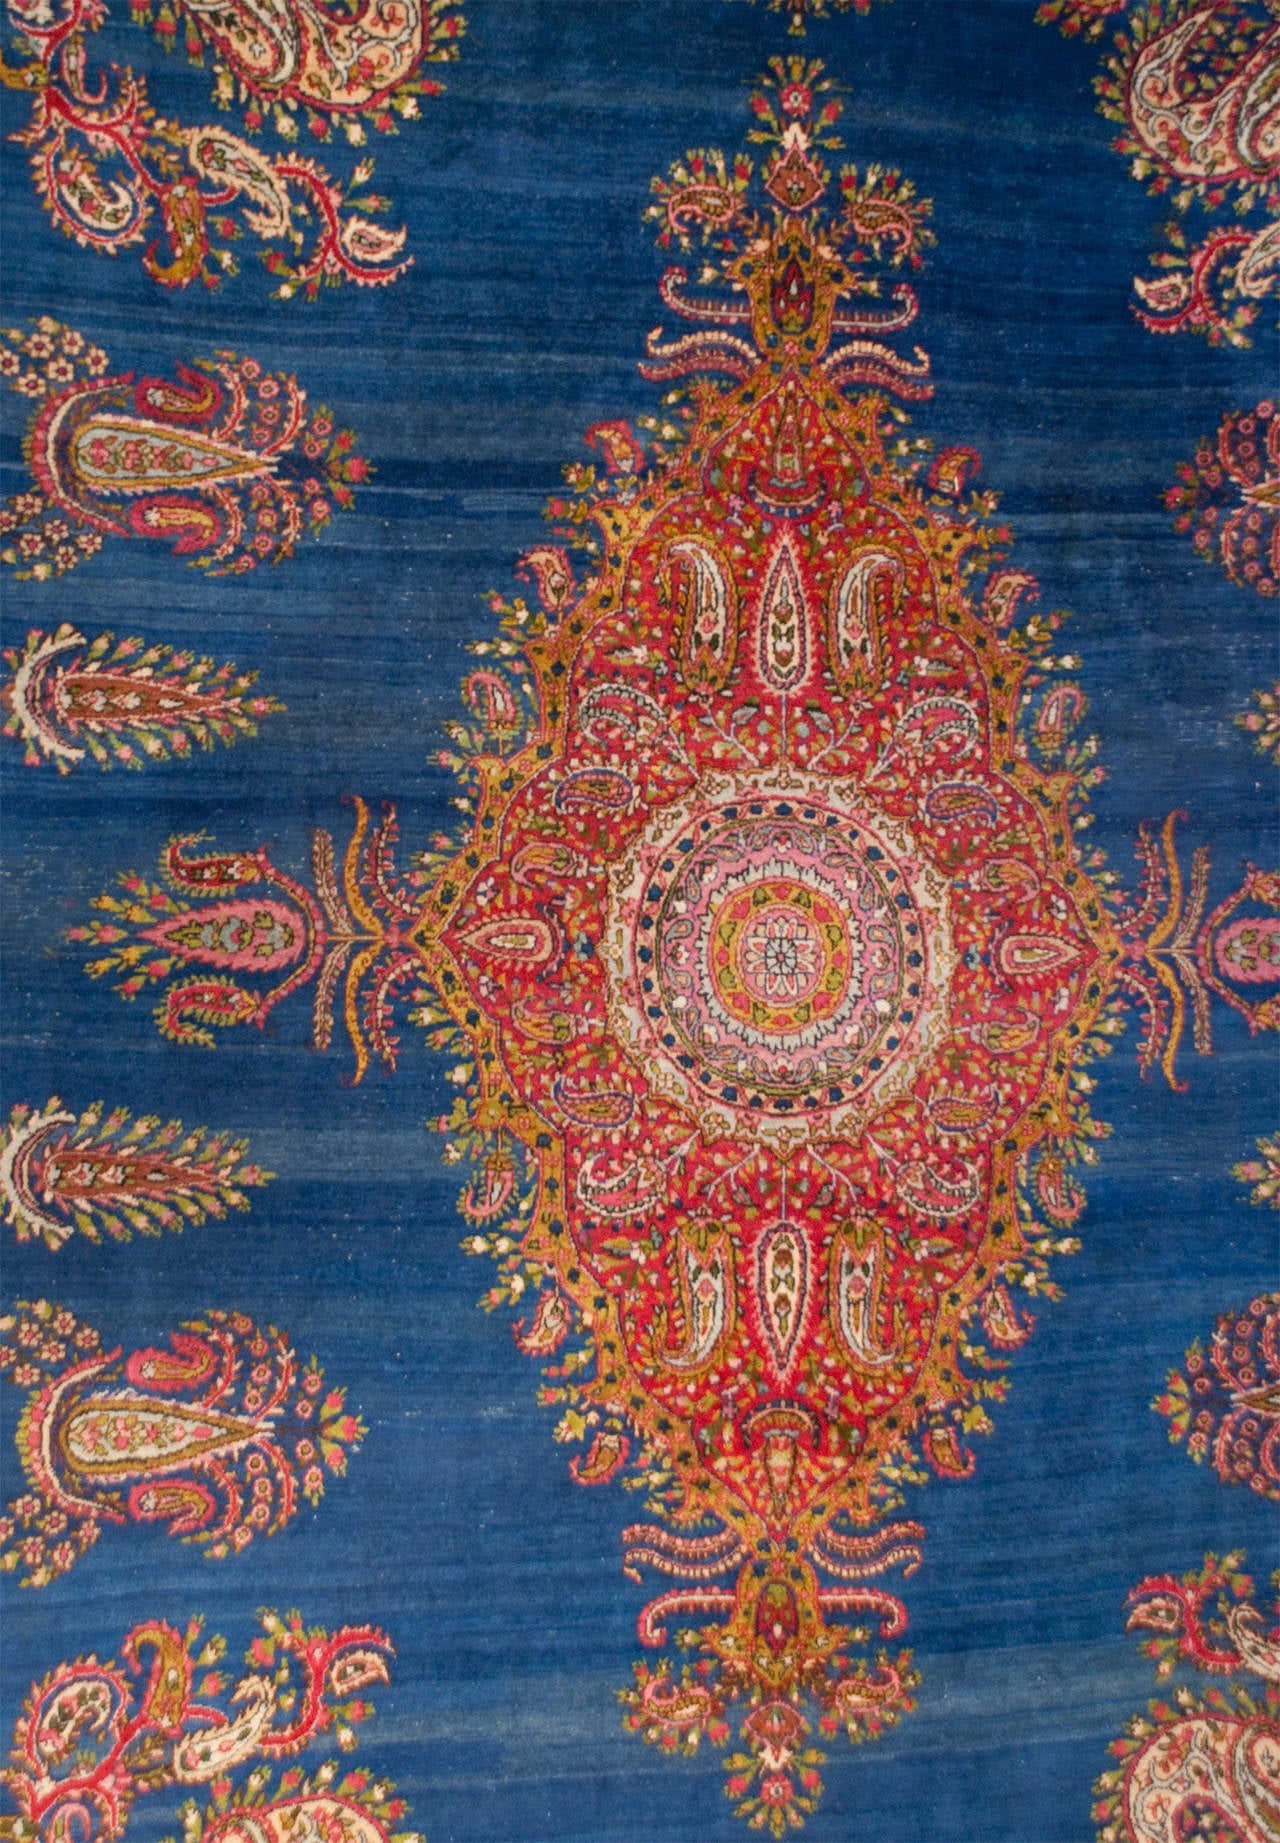 An early 20th century Persian Kirman rug with a wonderful indigo background, with a paisley pattern overlay, surrounded by multiple complementary floral and paisley borders.